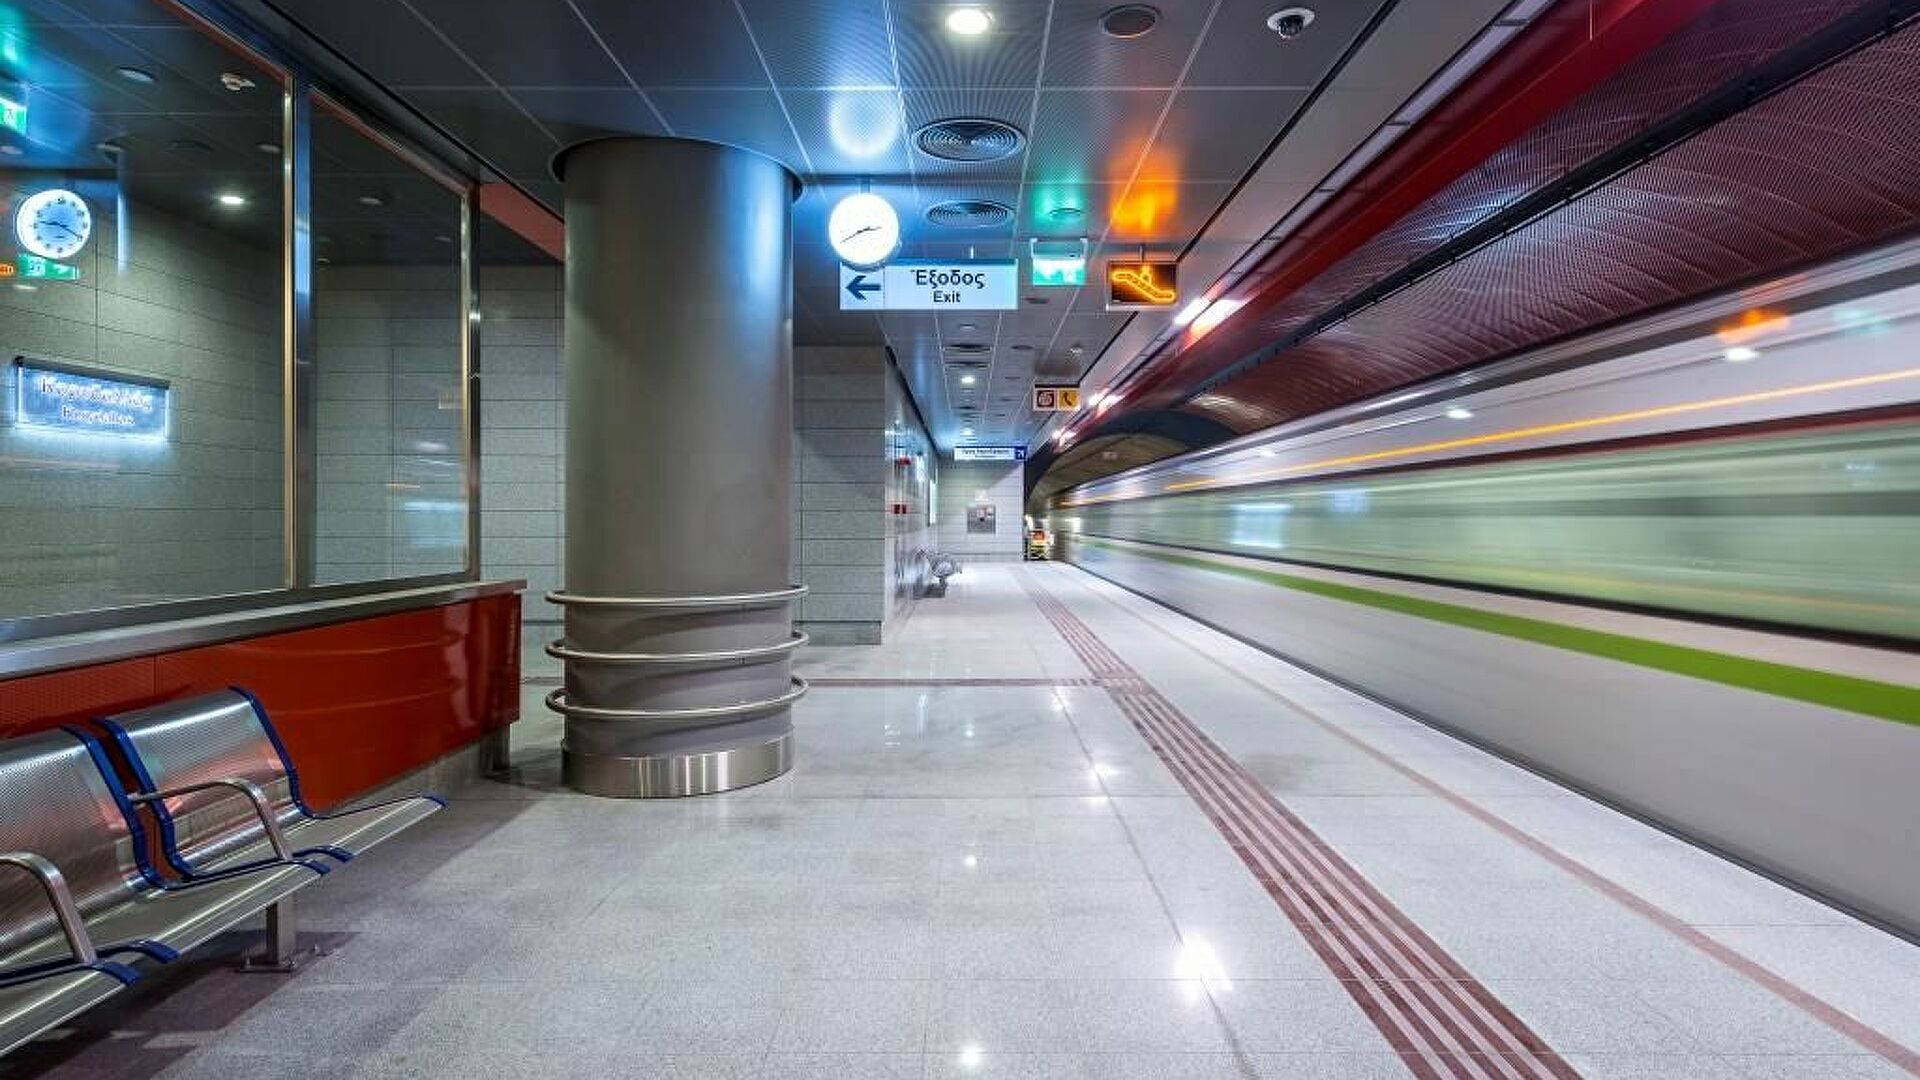 Thessaloniki's subway is estimated to be delivered to travellers by the end of 2022